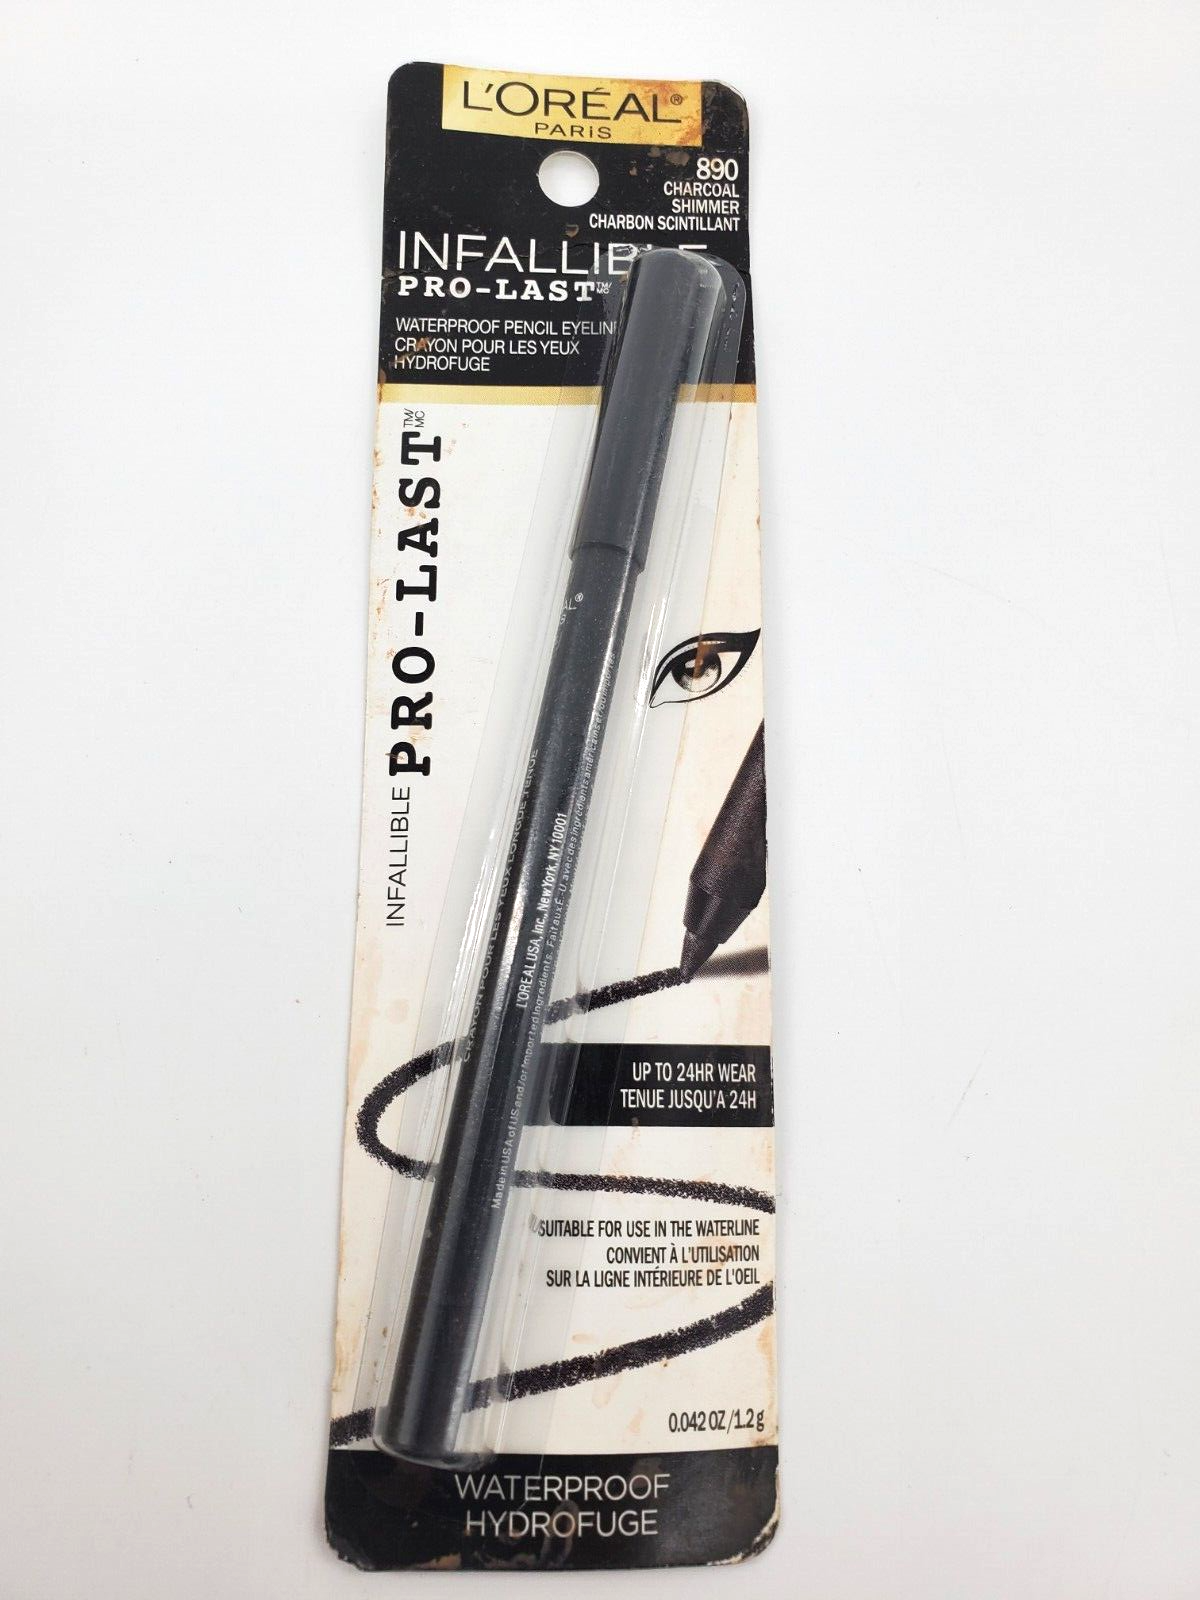 Primary image for L'oreal Infallible Pro Last Waterproof Eyeliner 890 Charcoal Damaged packaging